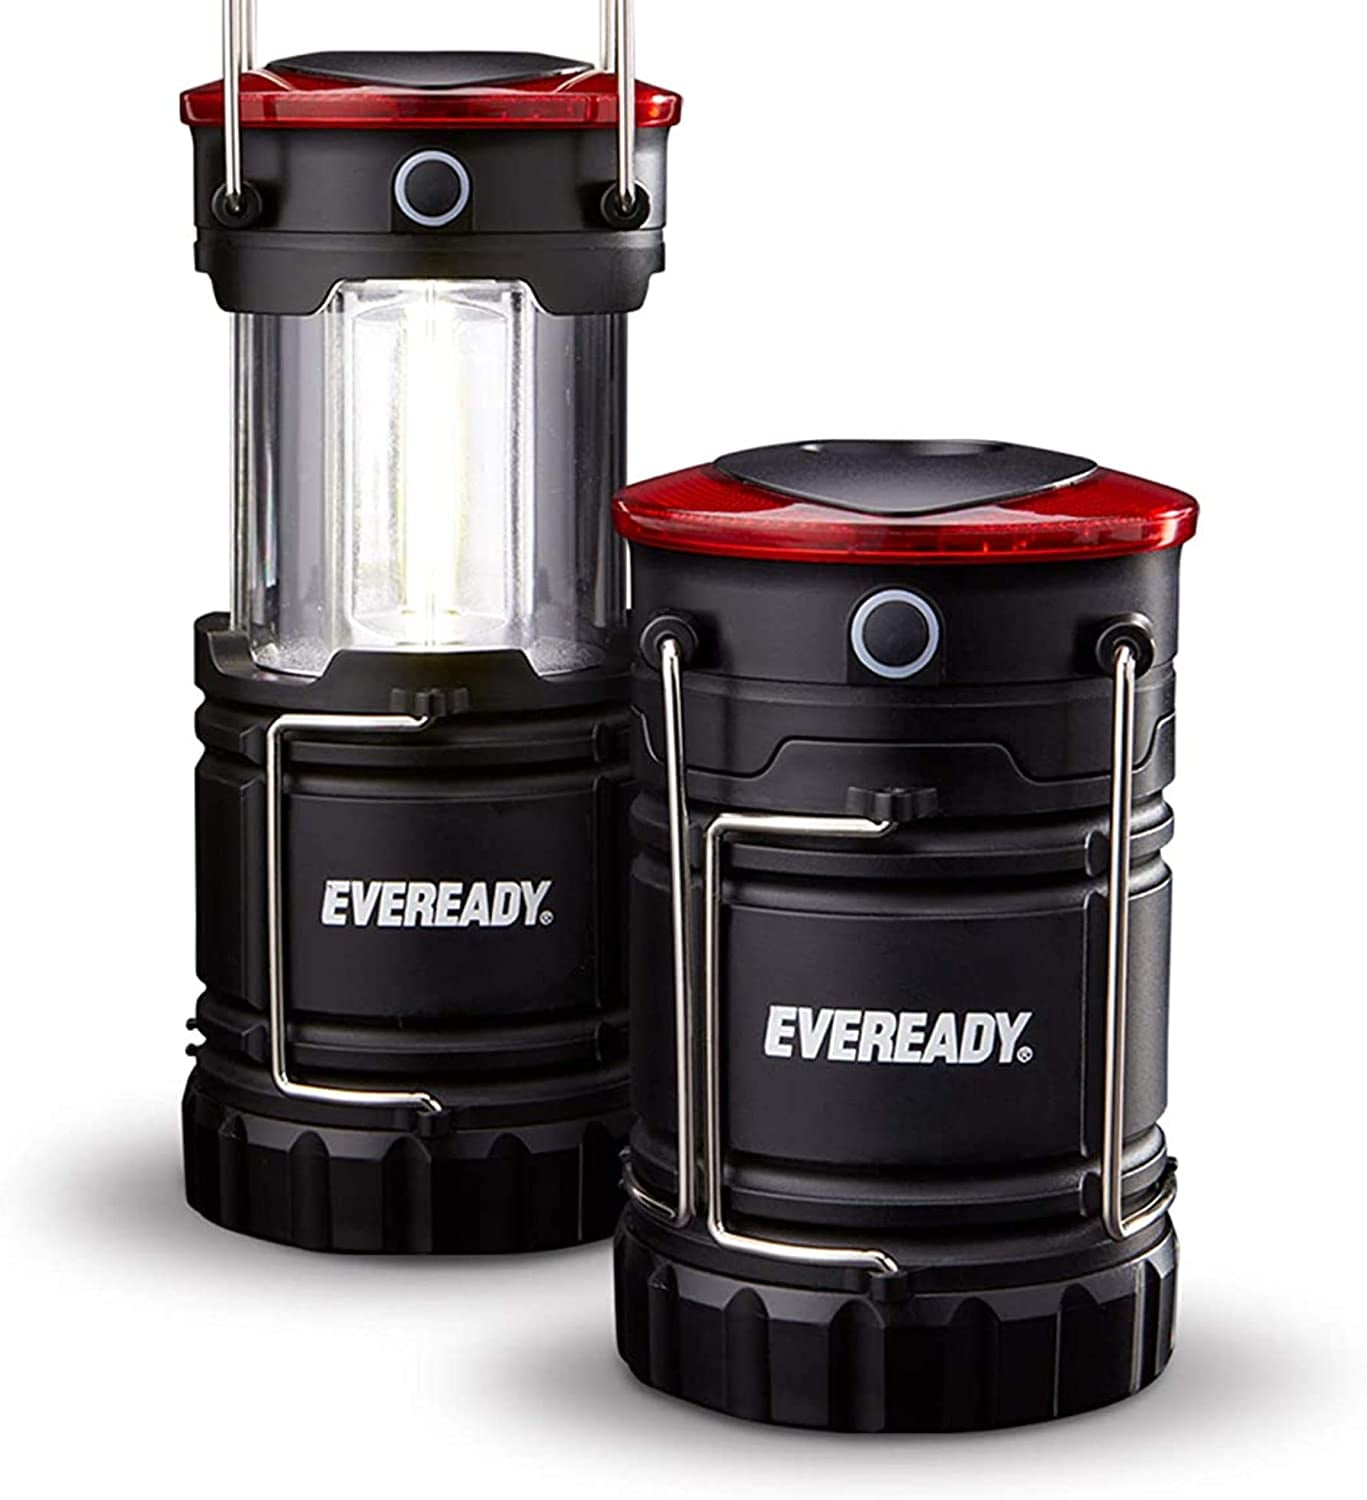 Eveready 360 LED Camping Lantern, IPX4 Water Resistant, Super Bright, 100  Hour Run-time, Battery Powered Outdoor LED Lantern, Black, 2-Pack, Compact